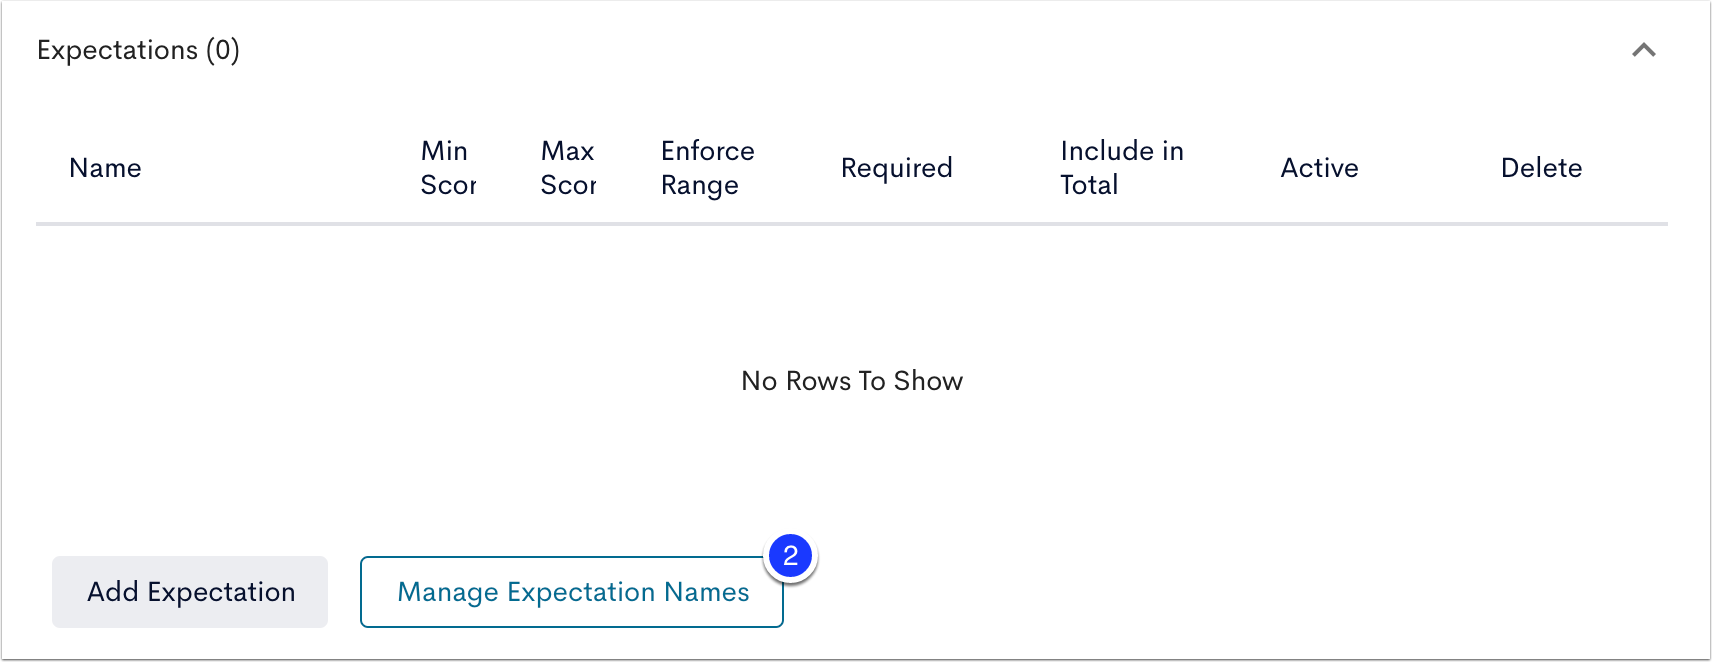 image of expectatinos module with manage expectations marked as step 2